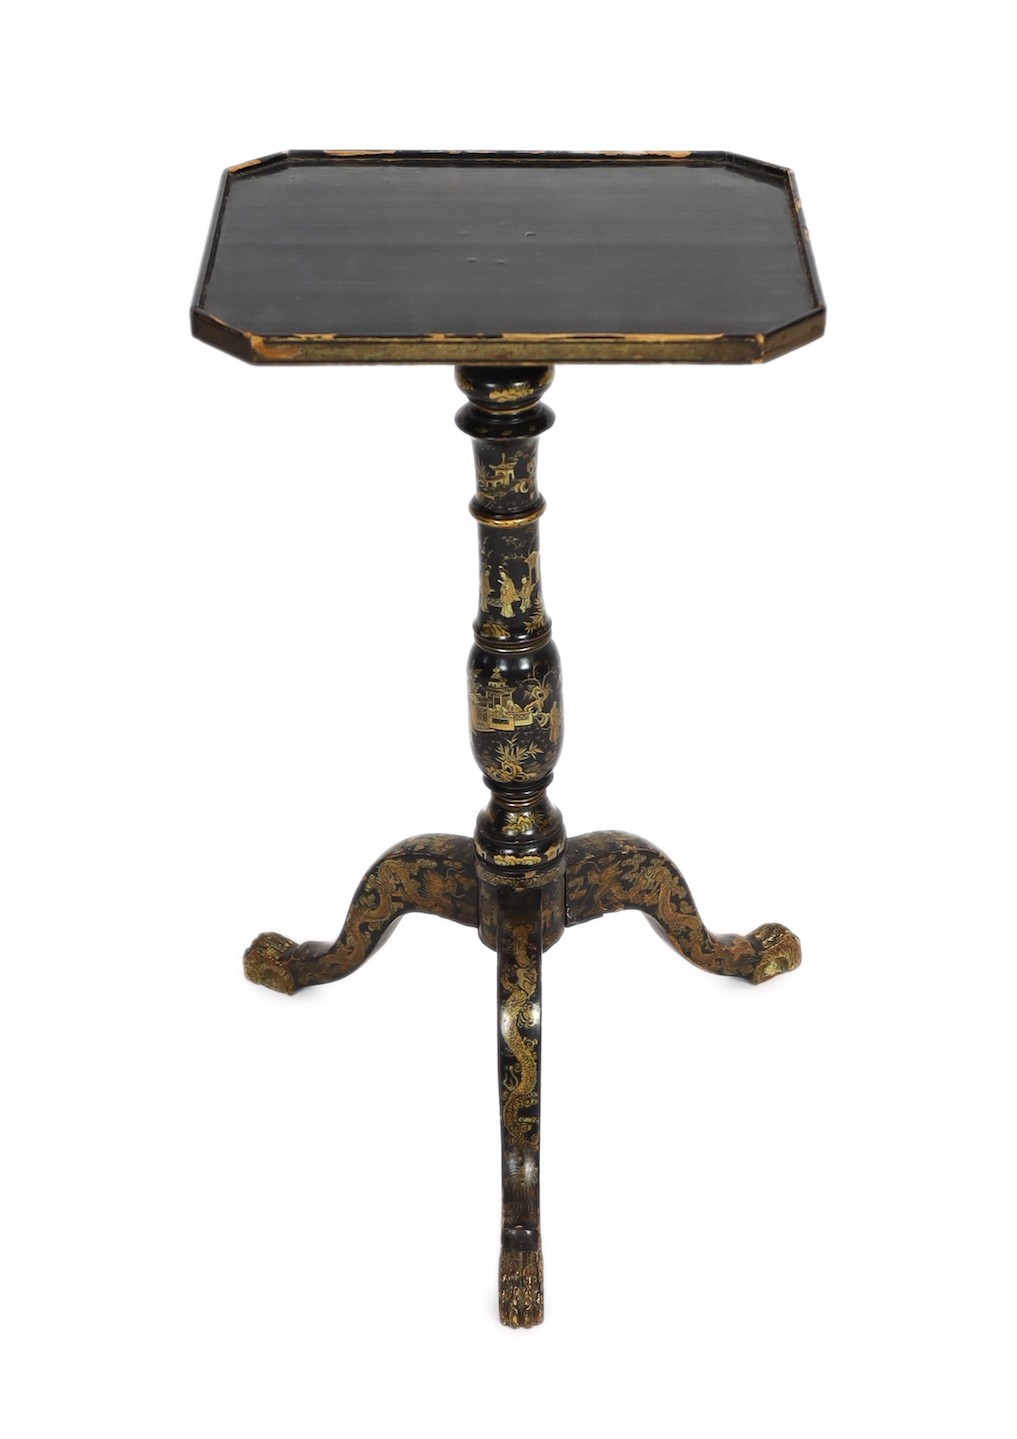 A Chinese export gilt-decorated black lacquer wine table, c.1840, 38 x 31.5cm, height 69cm                                                                                                                                  